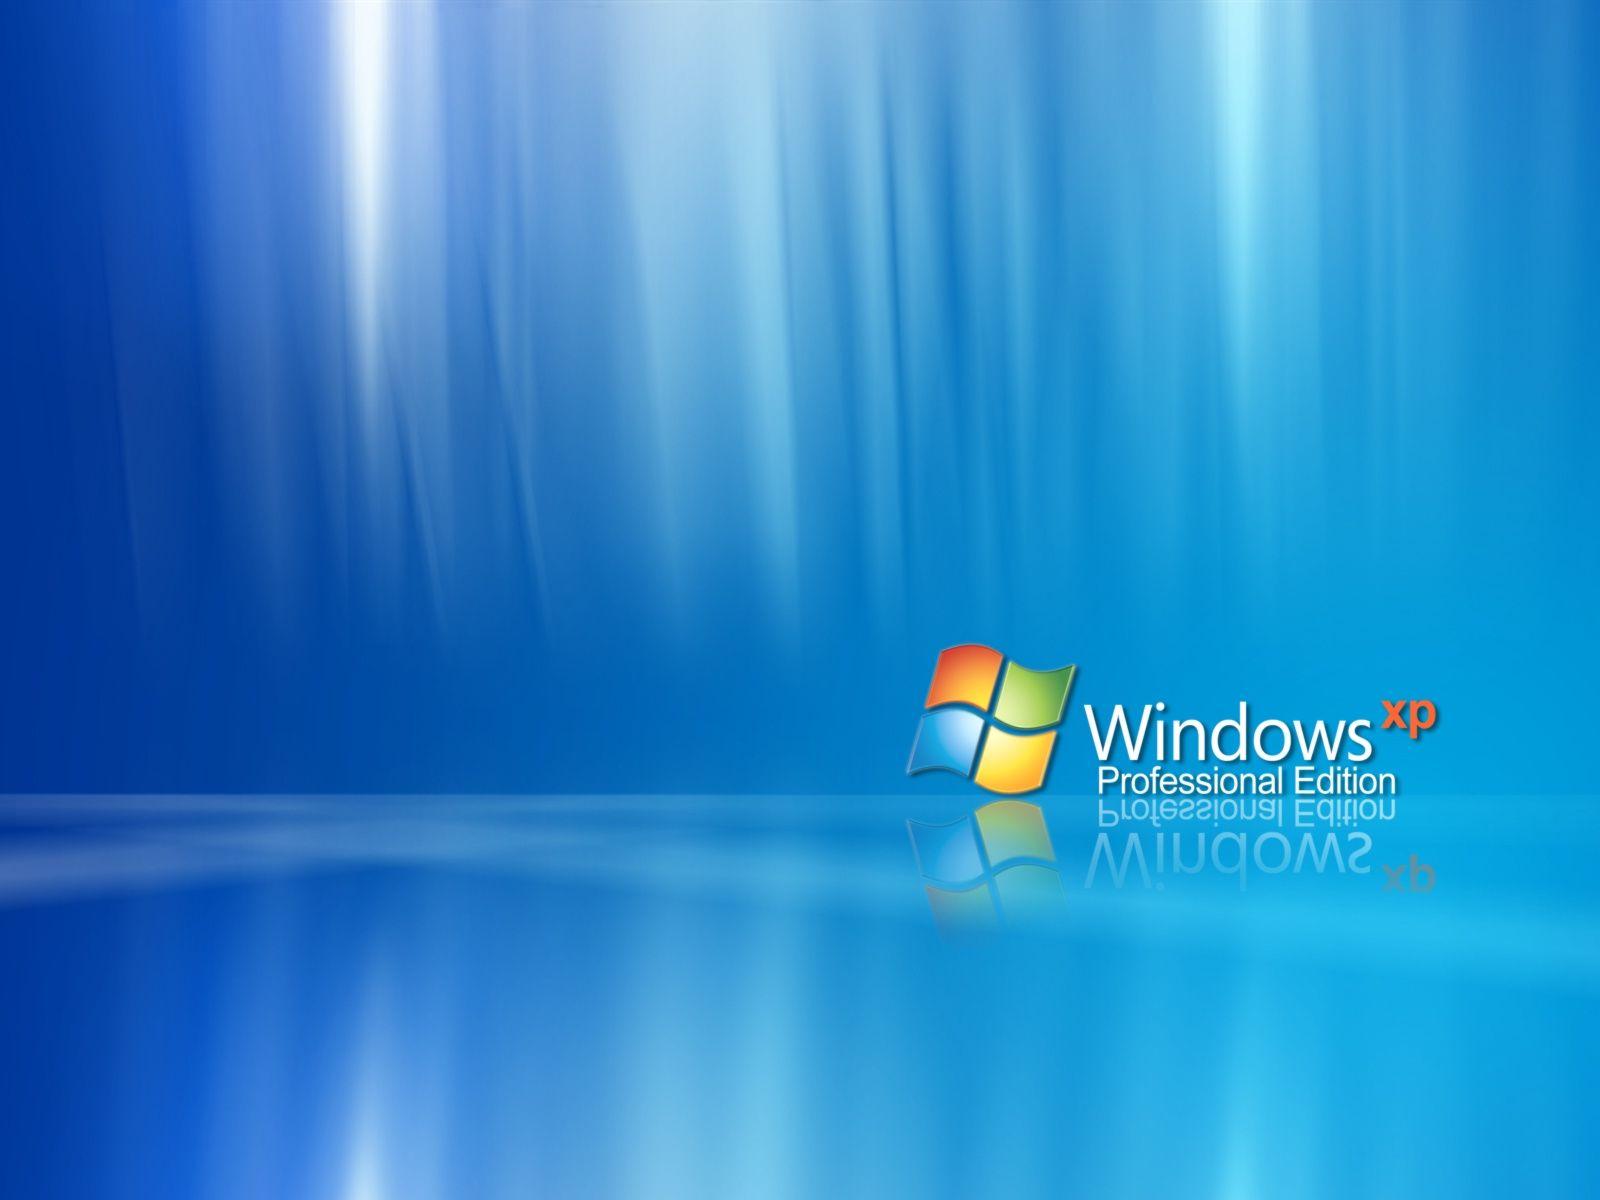 windows xp professional wallpapers download